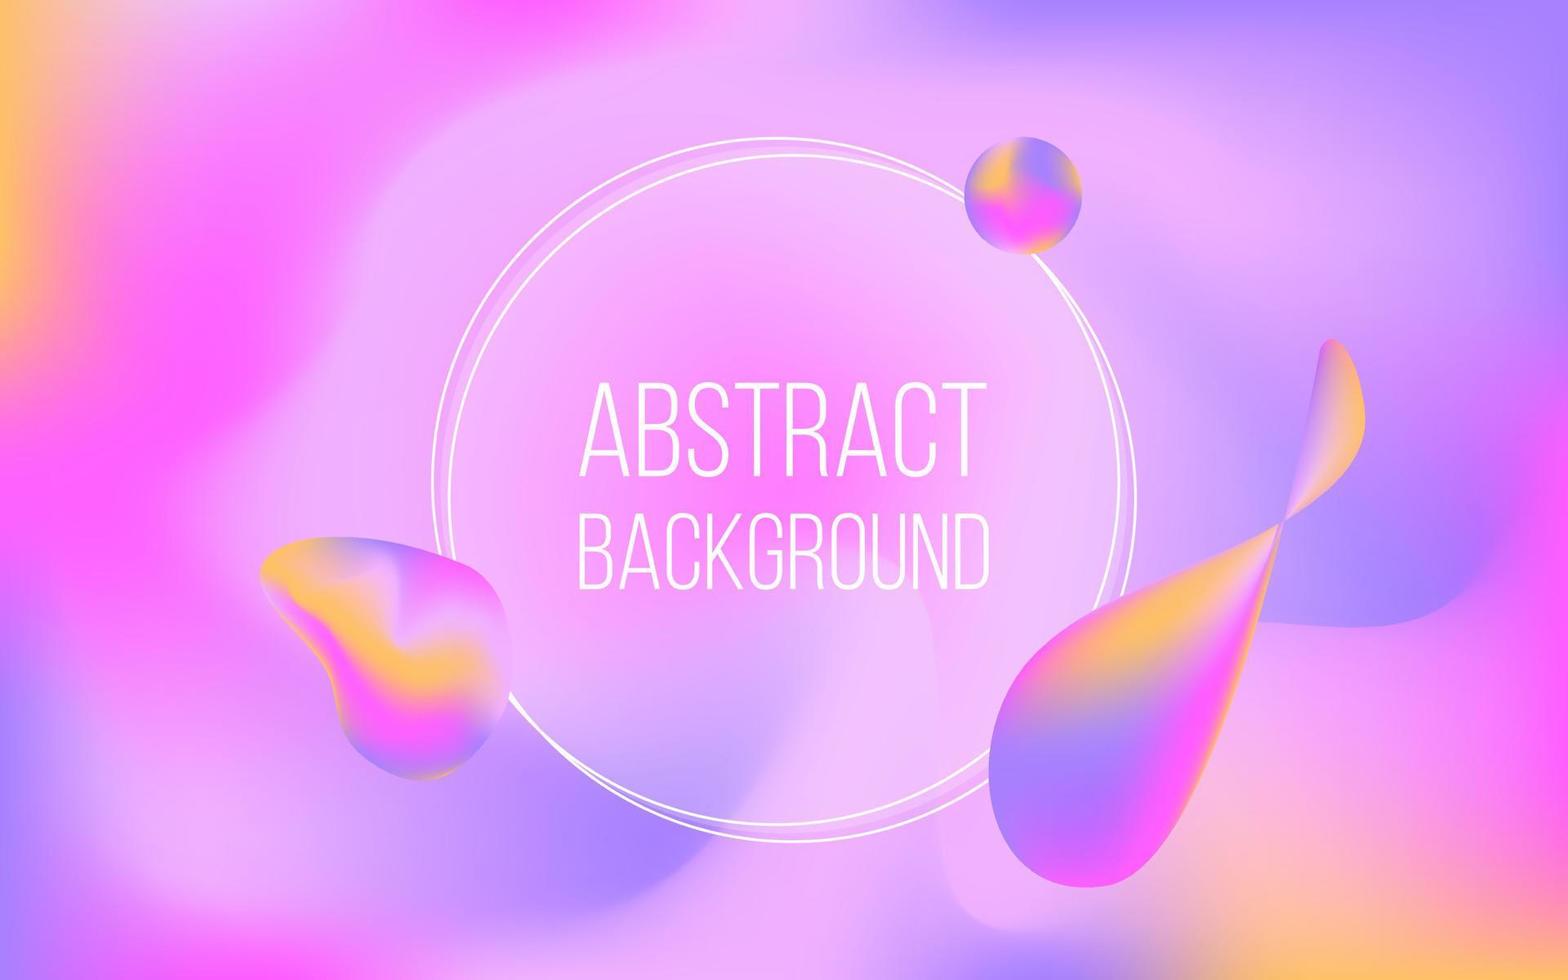 Abstract background with liquid shapes in gradient mesh style. Abstract banner on blurred gradient background. Trendy minimal design. Modern pink design template. Vector illustration